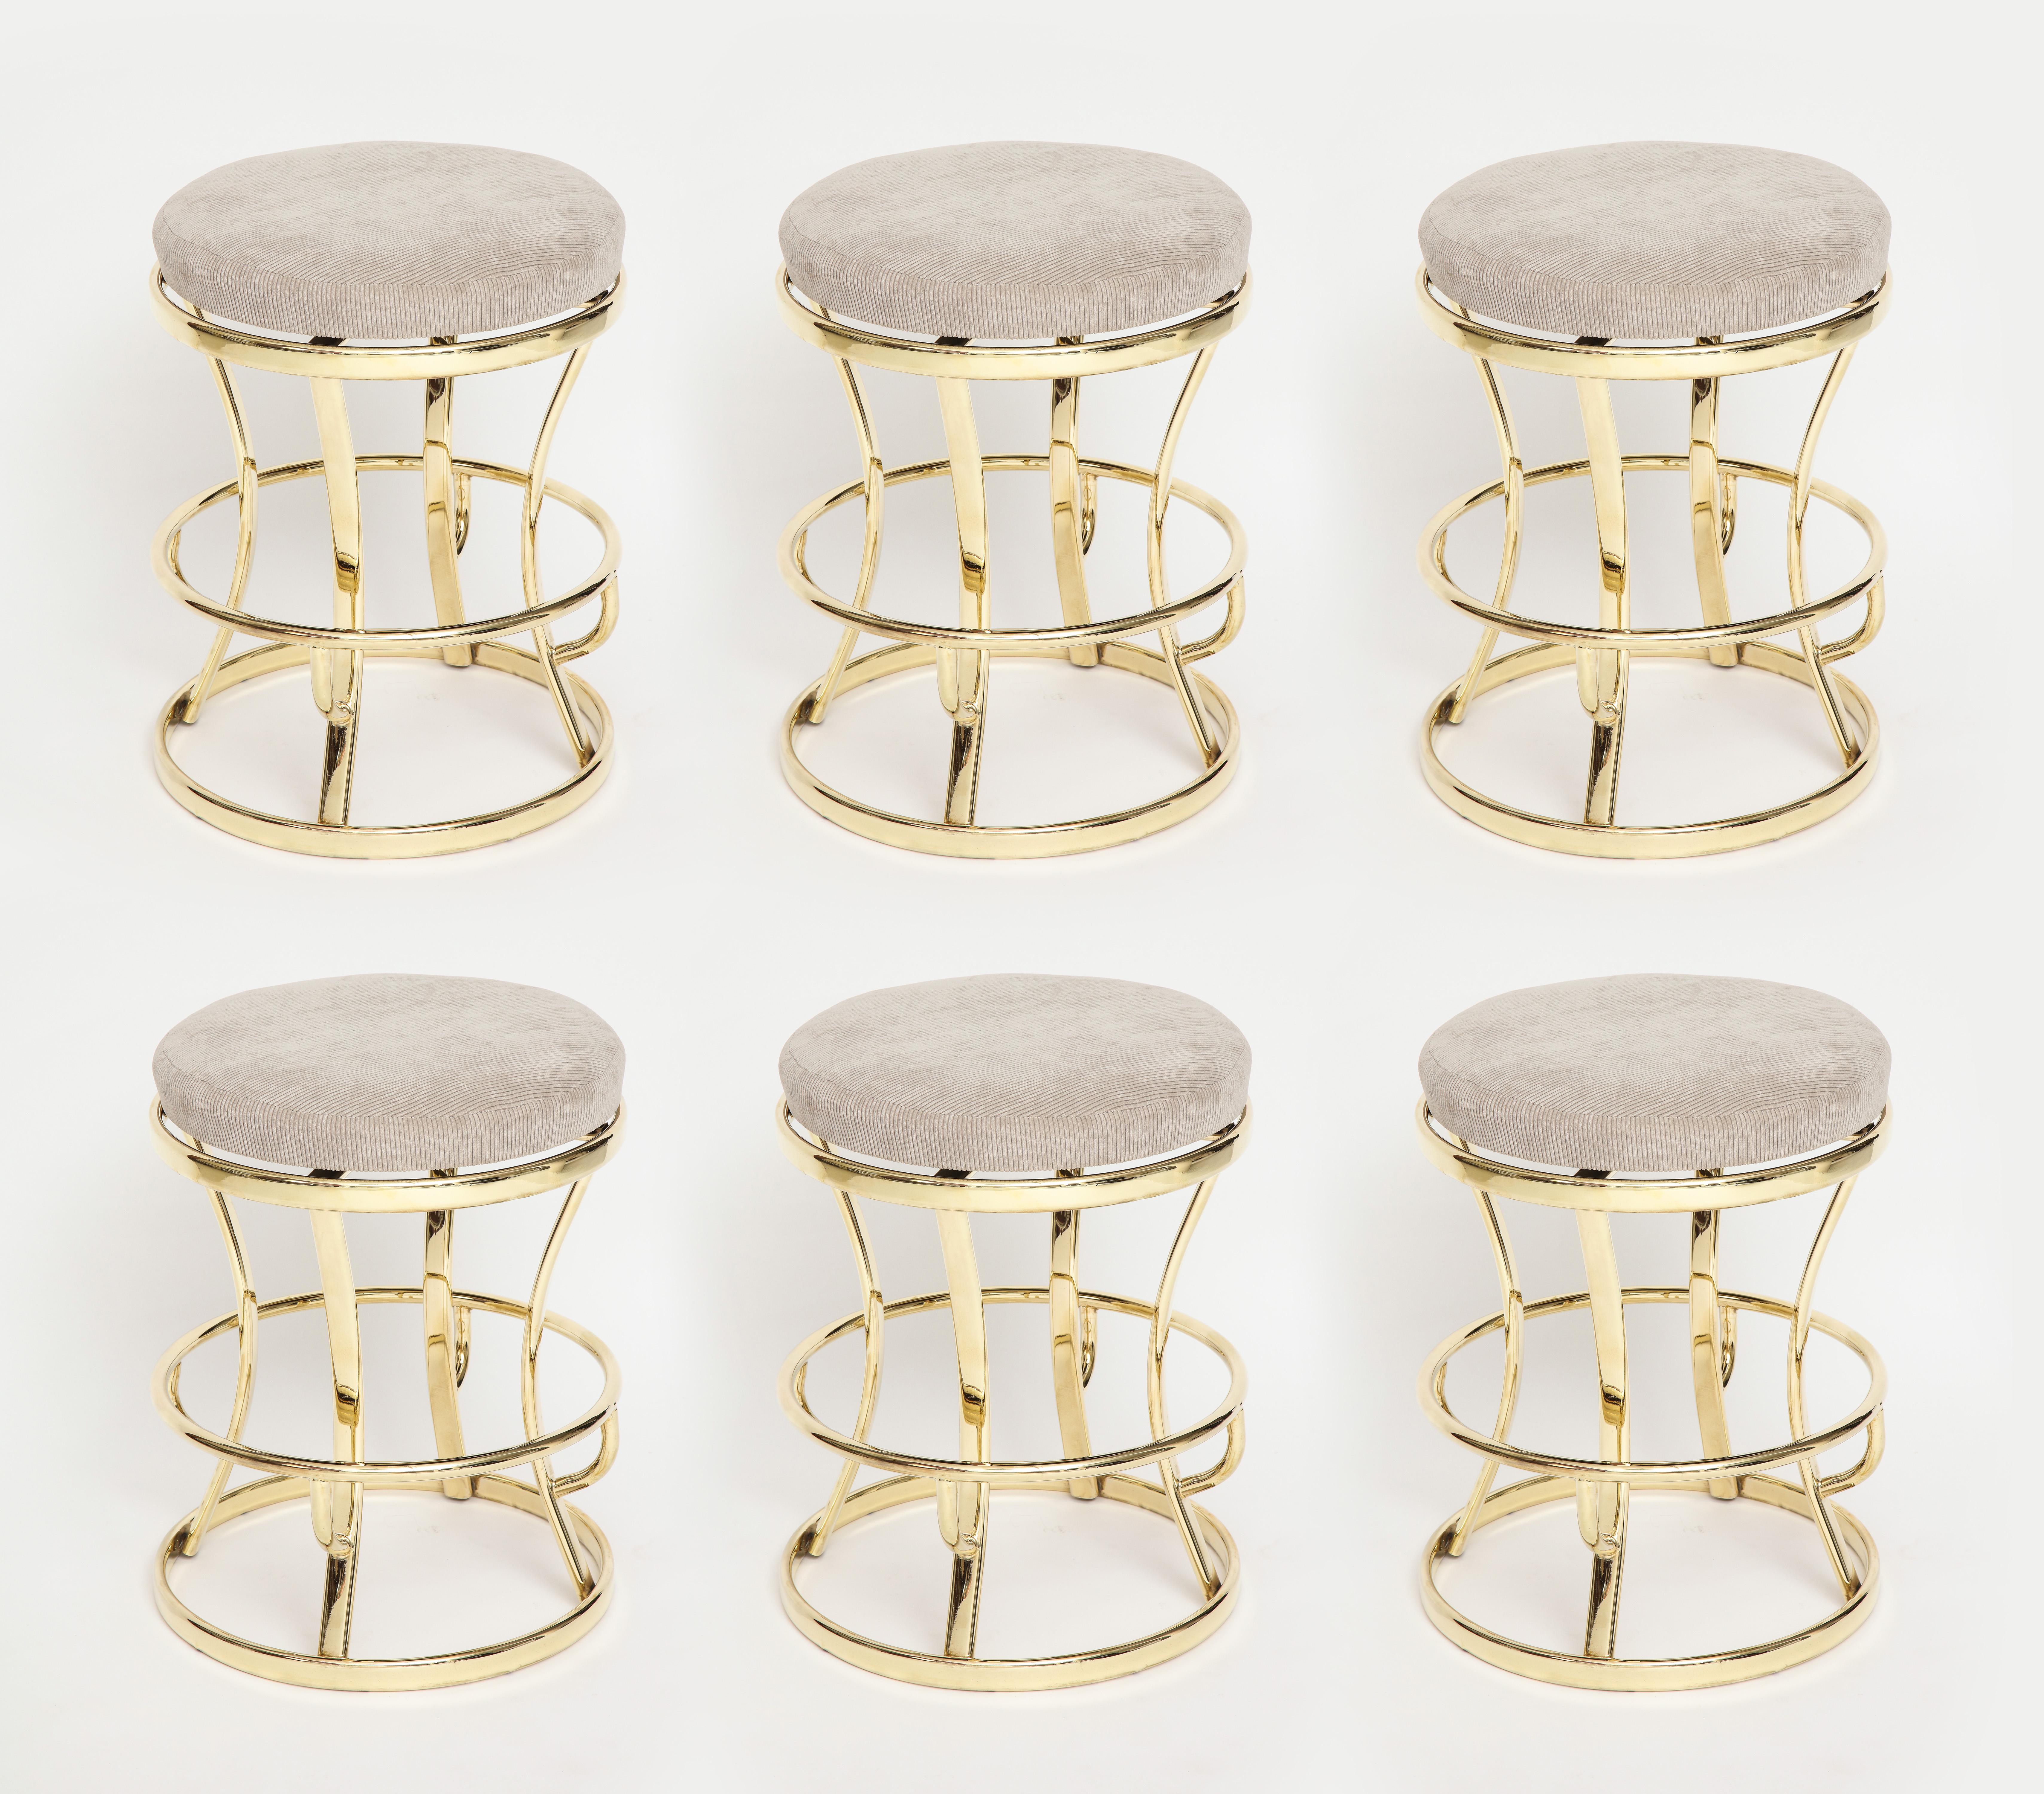 20th Century Four Glamorous Brass and Grey Barstools, Midcentury, France, 1970s For Sale